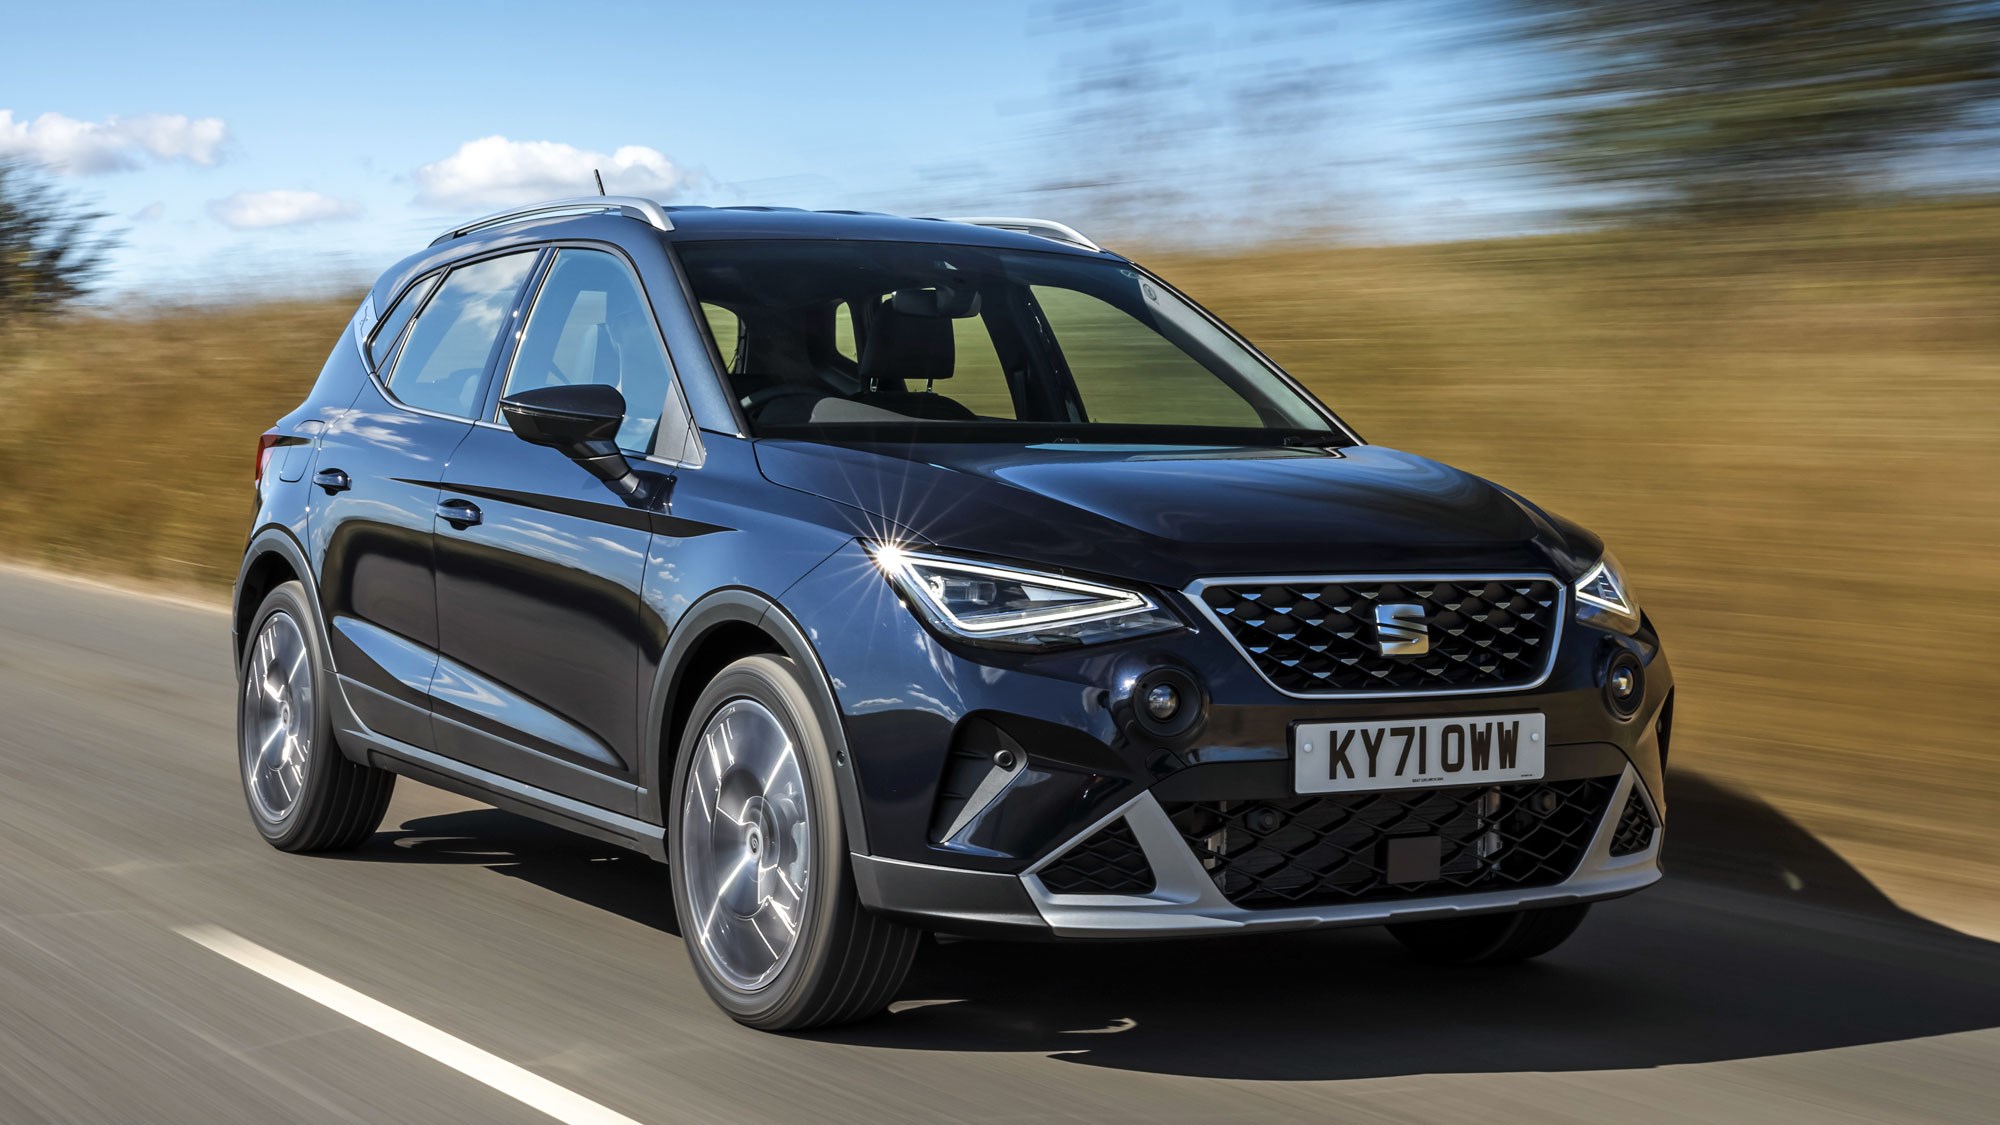 The Seat Arona is another new small SUV